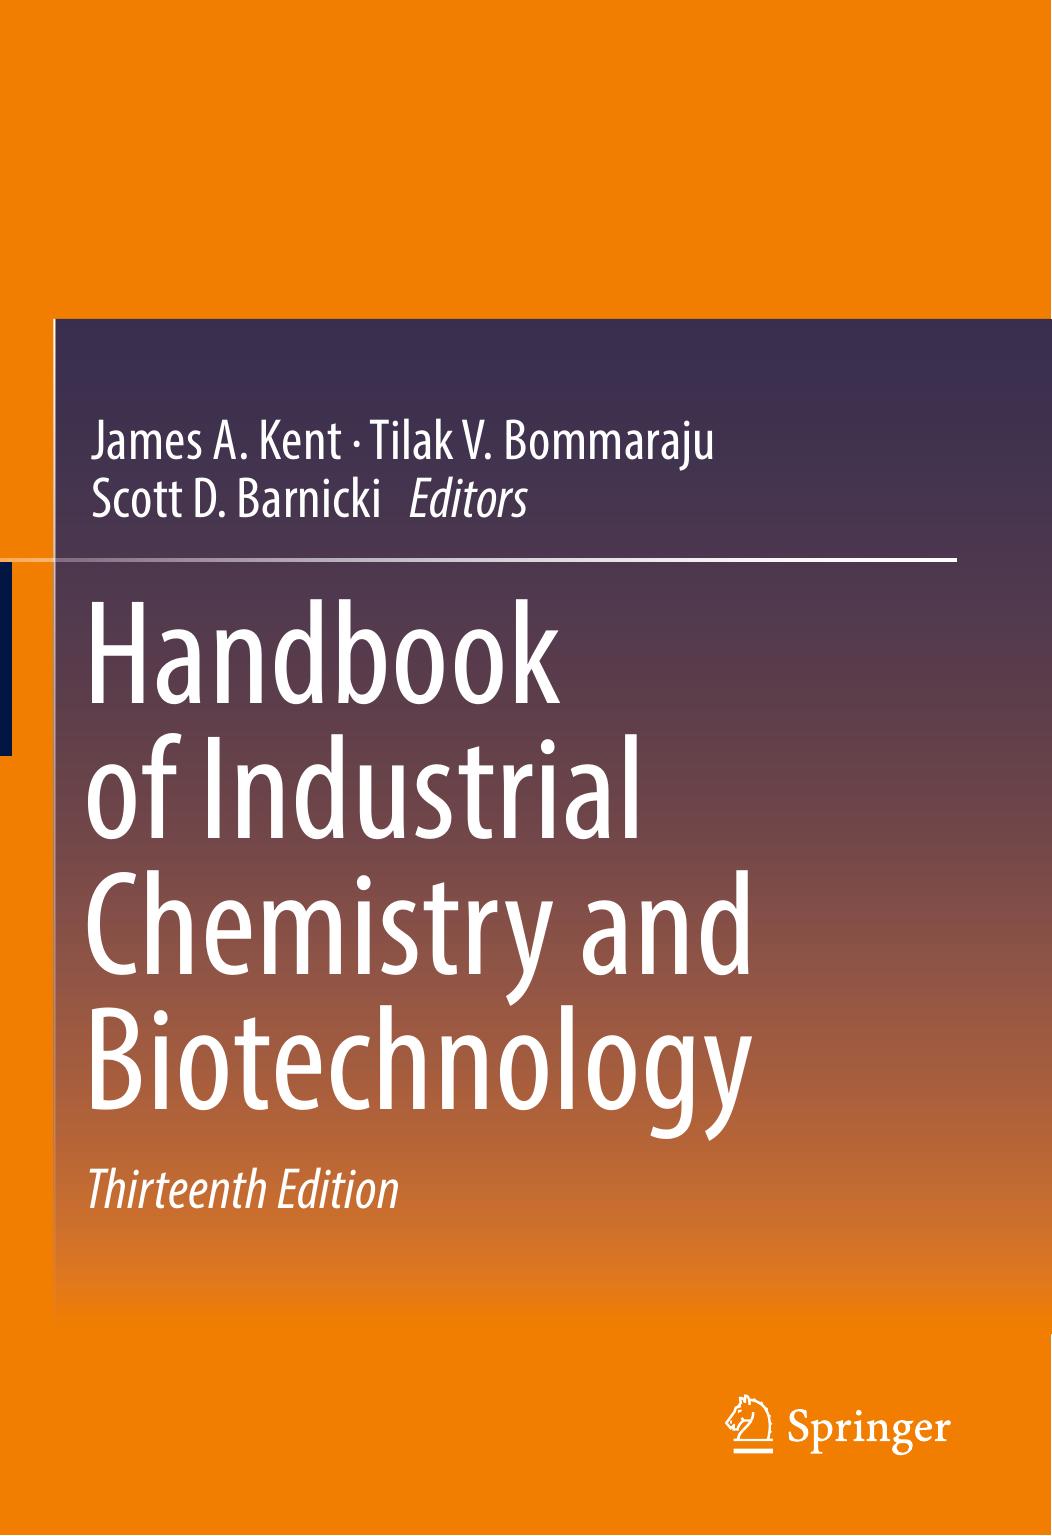 Handbook of industrial chemistry and biotechnology (1) 2017